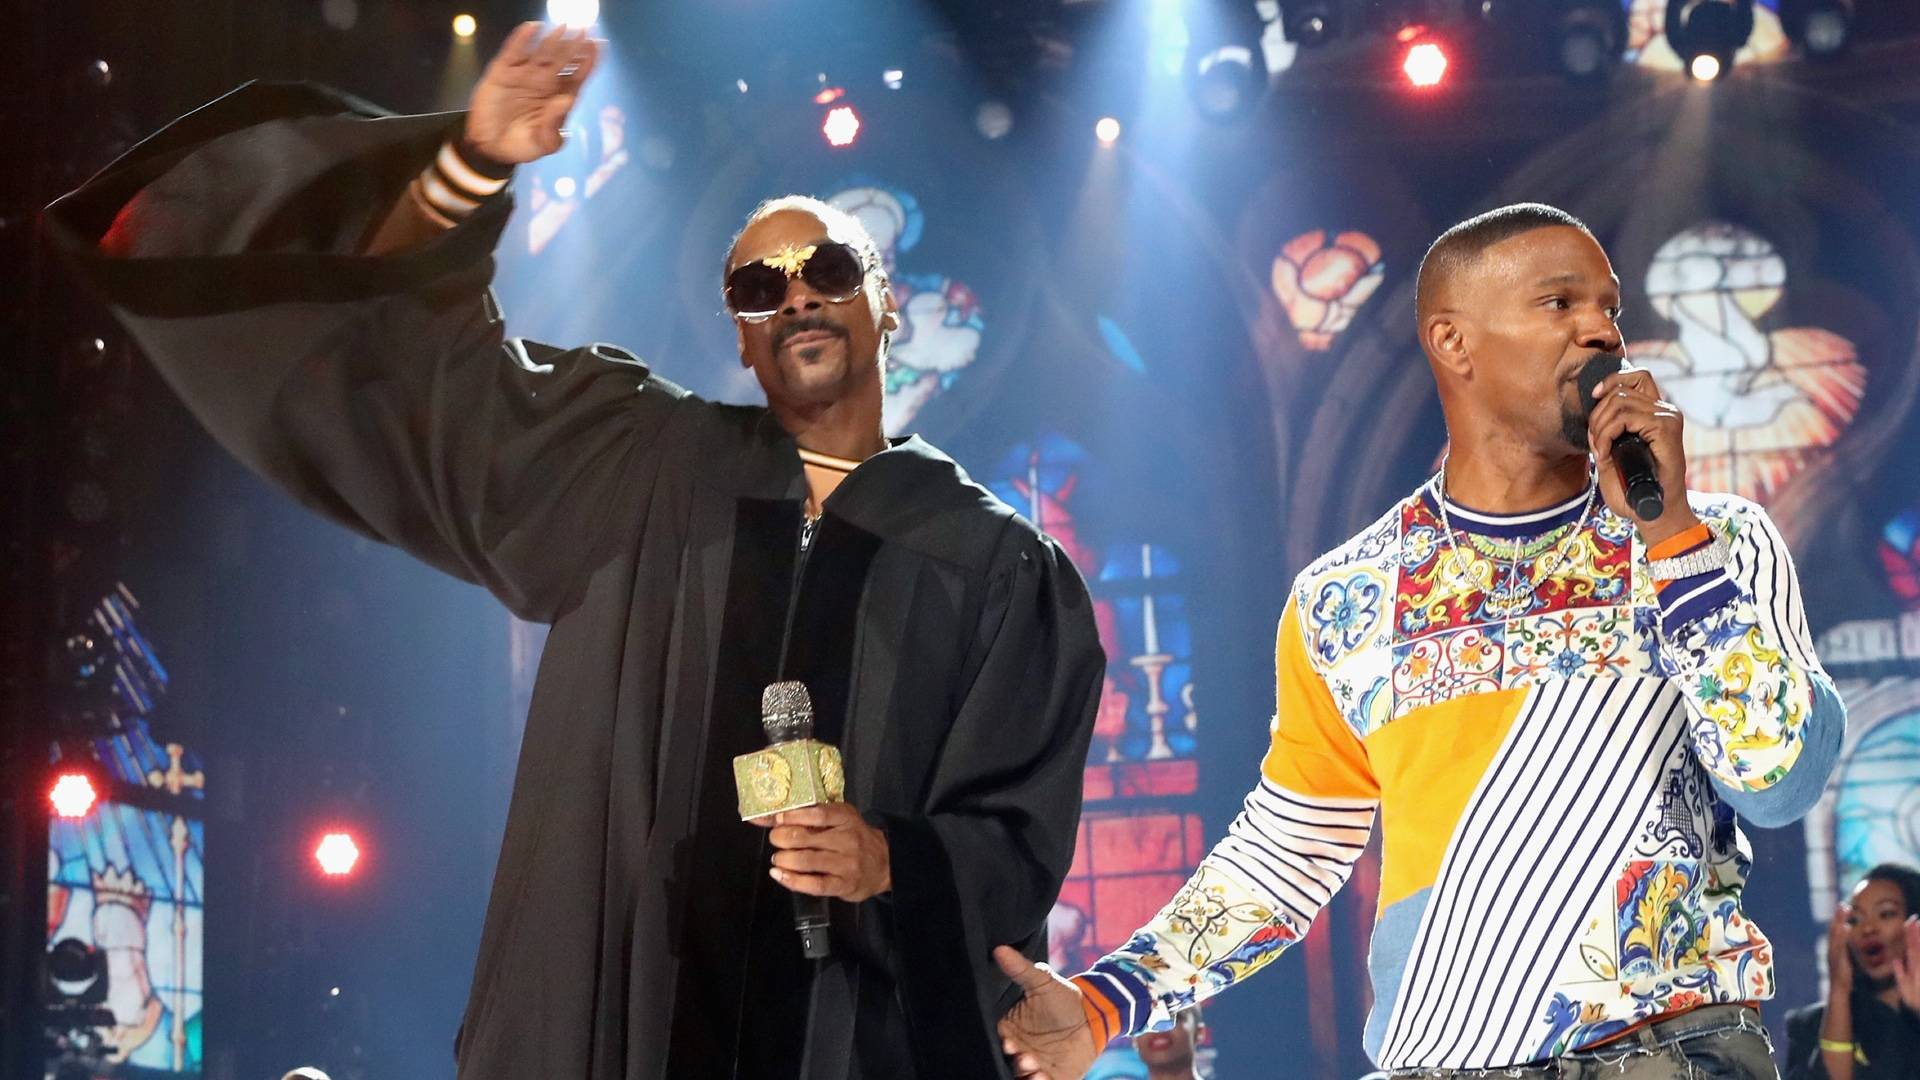 Snoop Dogg and host Jamie Foxx perform onstage at the 2018 BET Awards at Microsoft Theater on June 24, 2018.